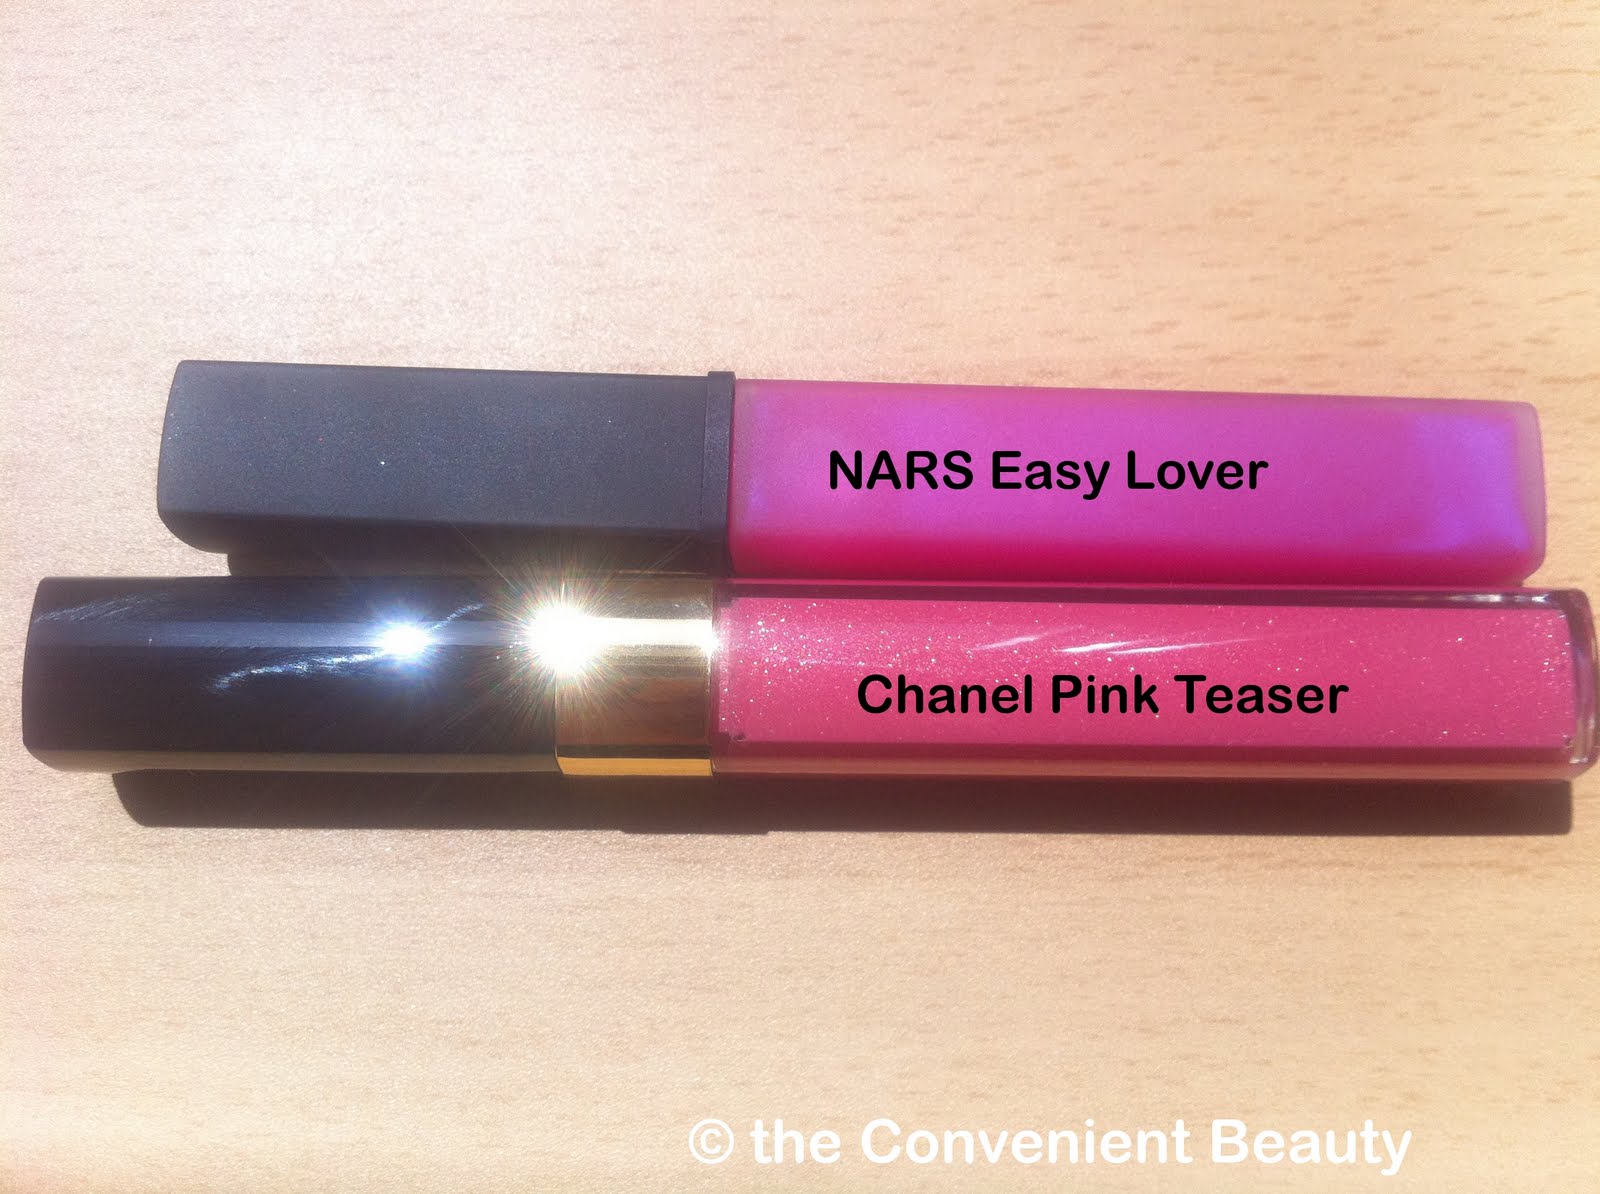 The Convenient Beauty: Review: Wearable bright pink lips - Nars